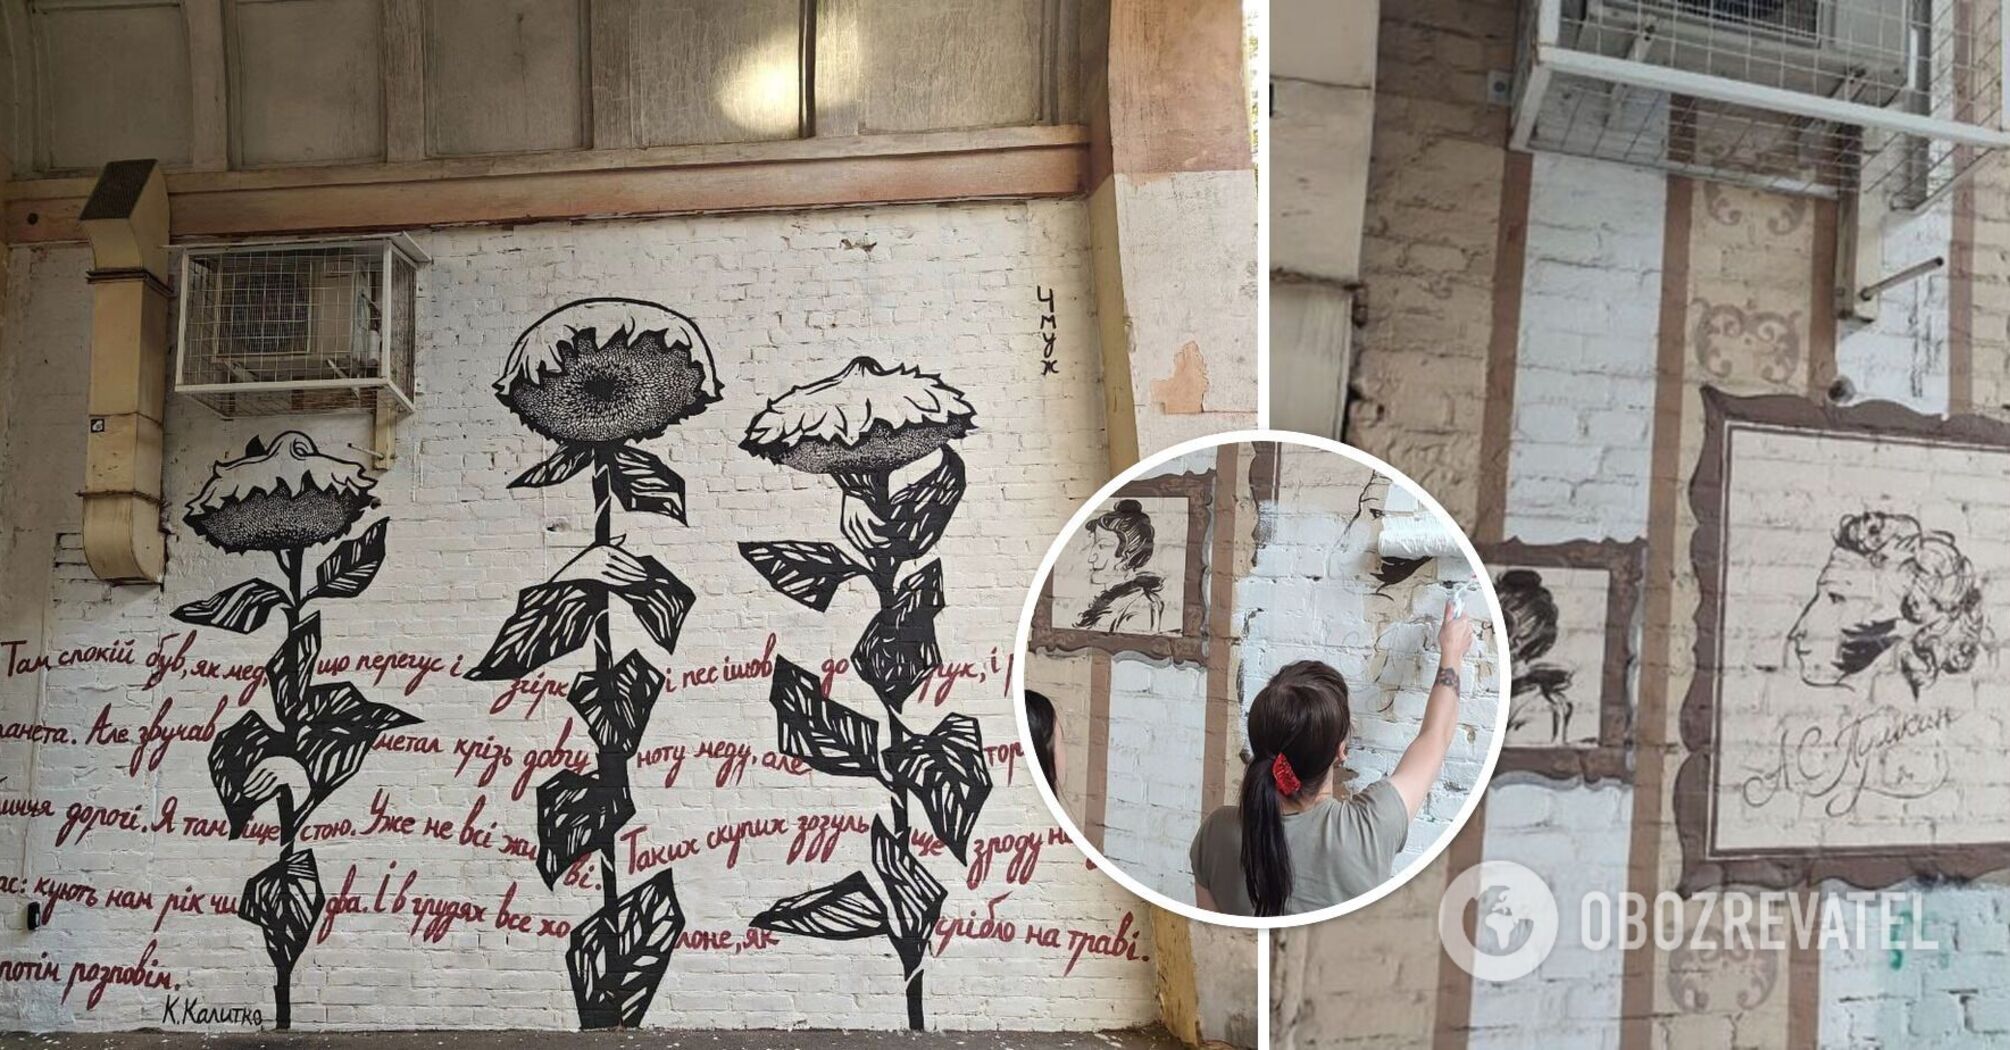 Sunflowers and Ukrainian poetry instead of Pushkin: a famous mural repainted in Kharkiv. Photo